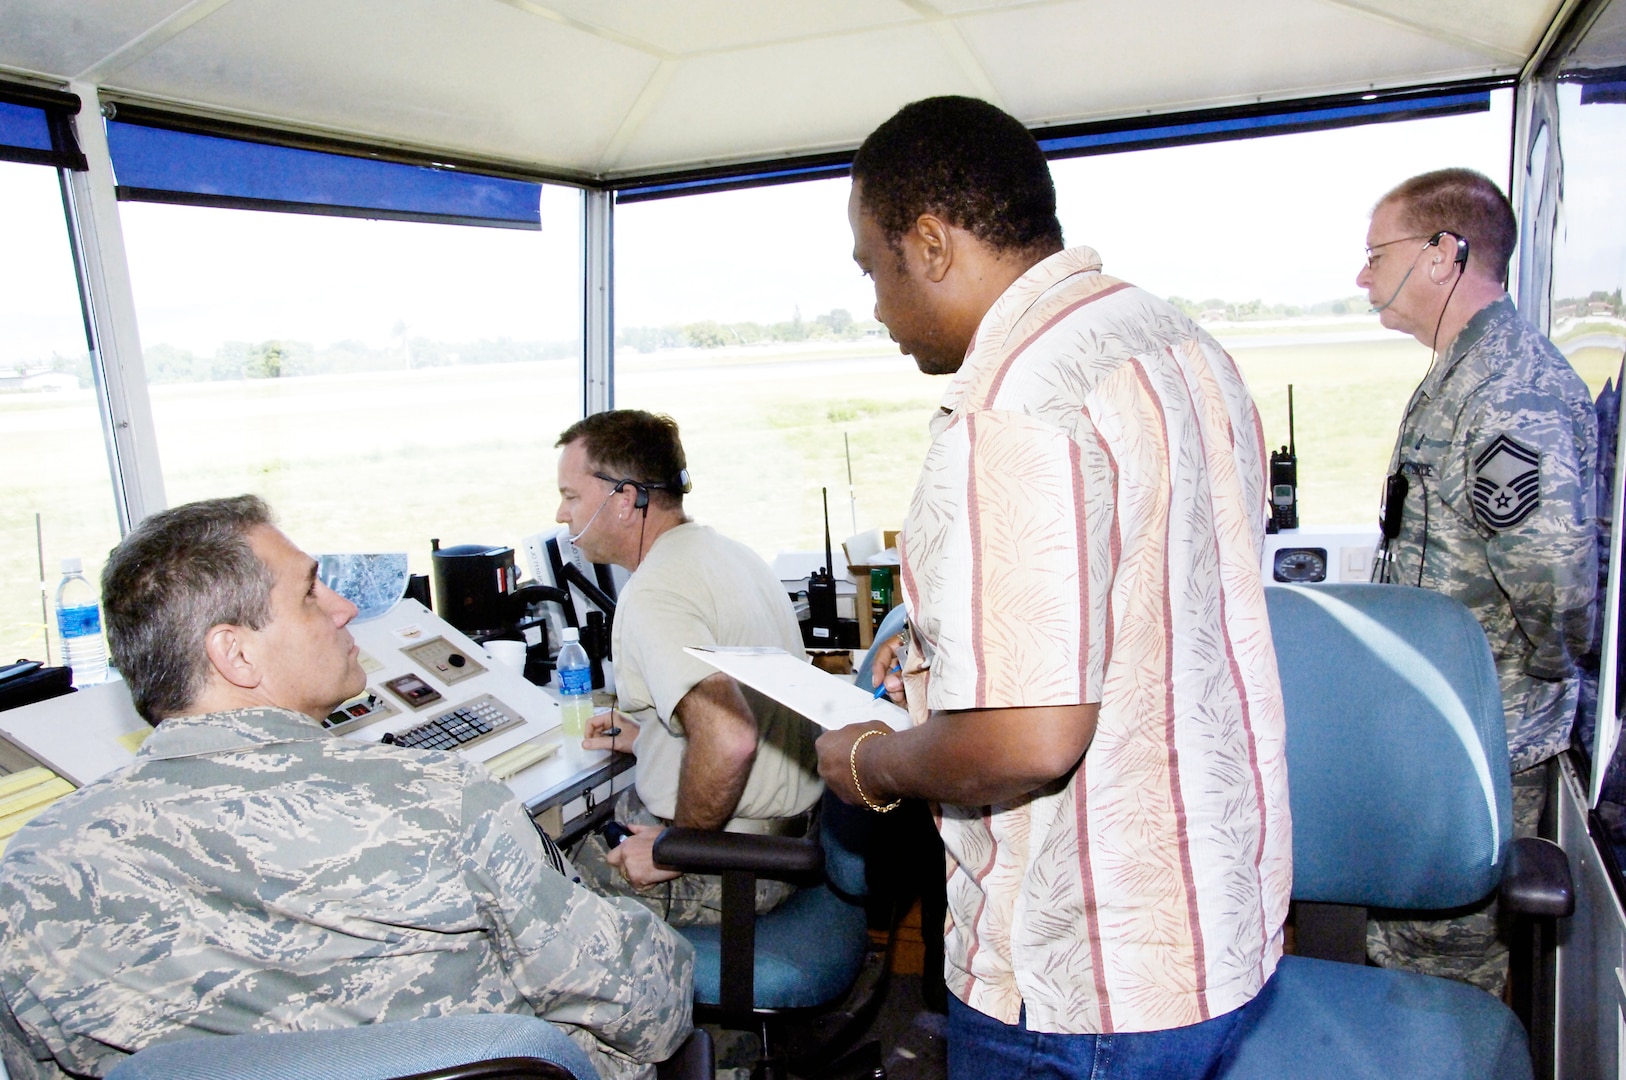 Reginald Bailey receives familiarization instruction from Air Force air traffic controllers in the mobile tower Feb. 1, 2010, at the airport in Port-au-Prince, Haiti. The transition is currently taking place to hand over the tower and all flight operations responsibilities over to the Haitians. Bailey is a Haitian air traffic controller. (U.S. Air Force photo/Tech. Sgt. Larry W. Carpenter Jr.)